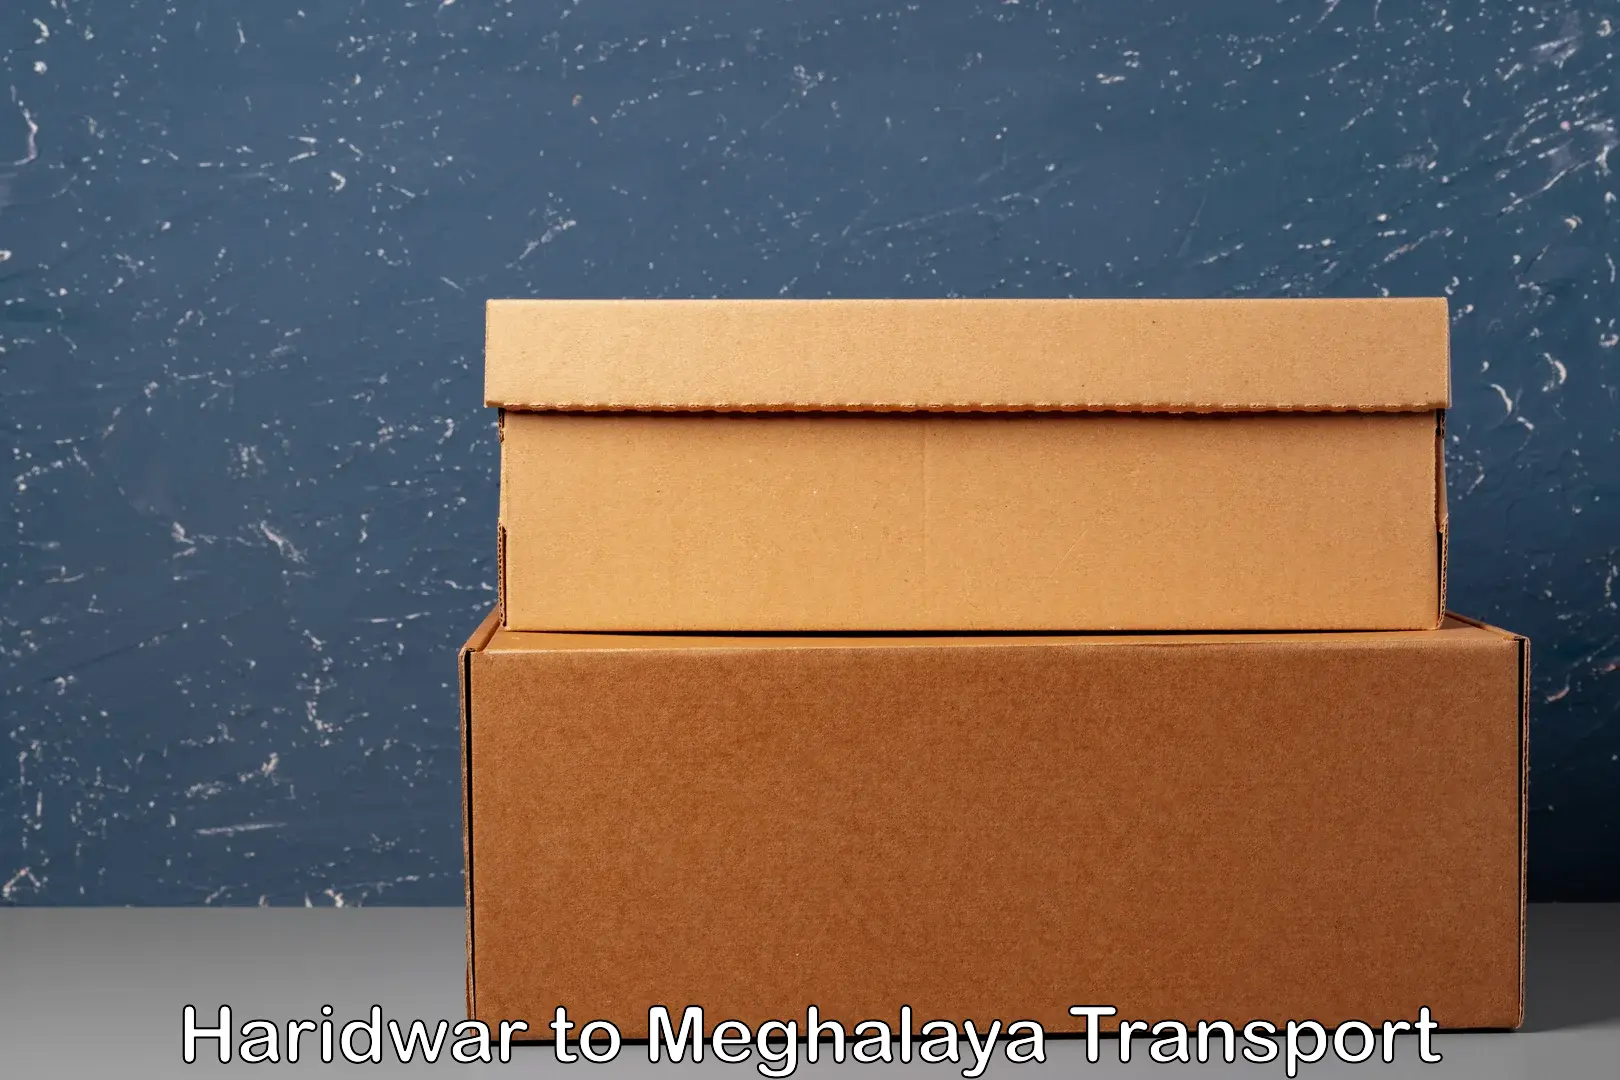 Air freight transport services Haridwar to Shillong